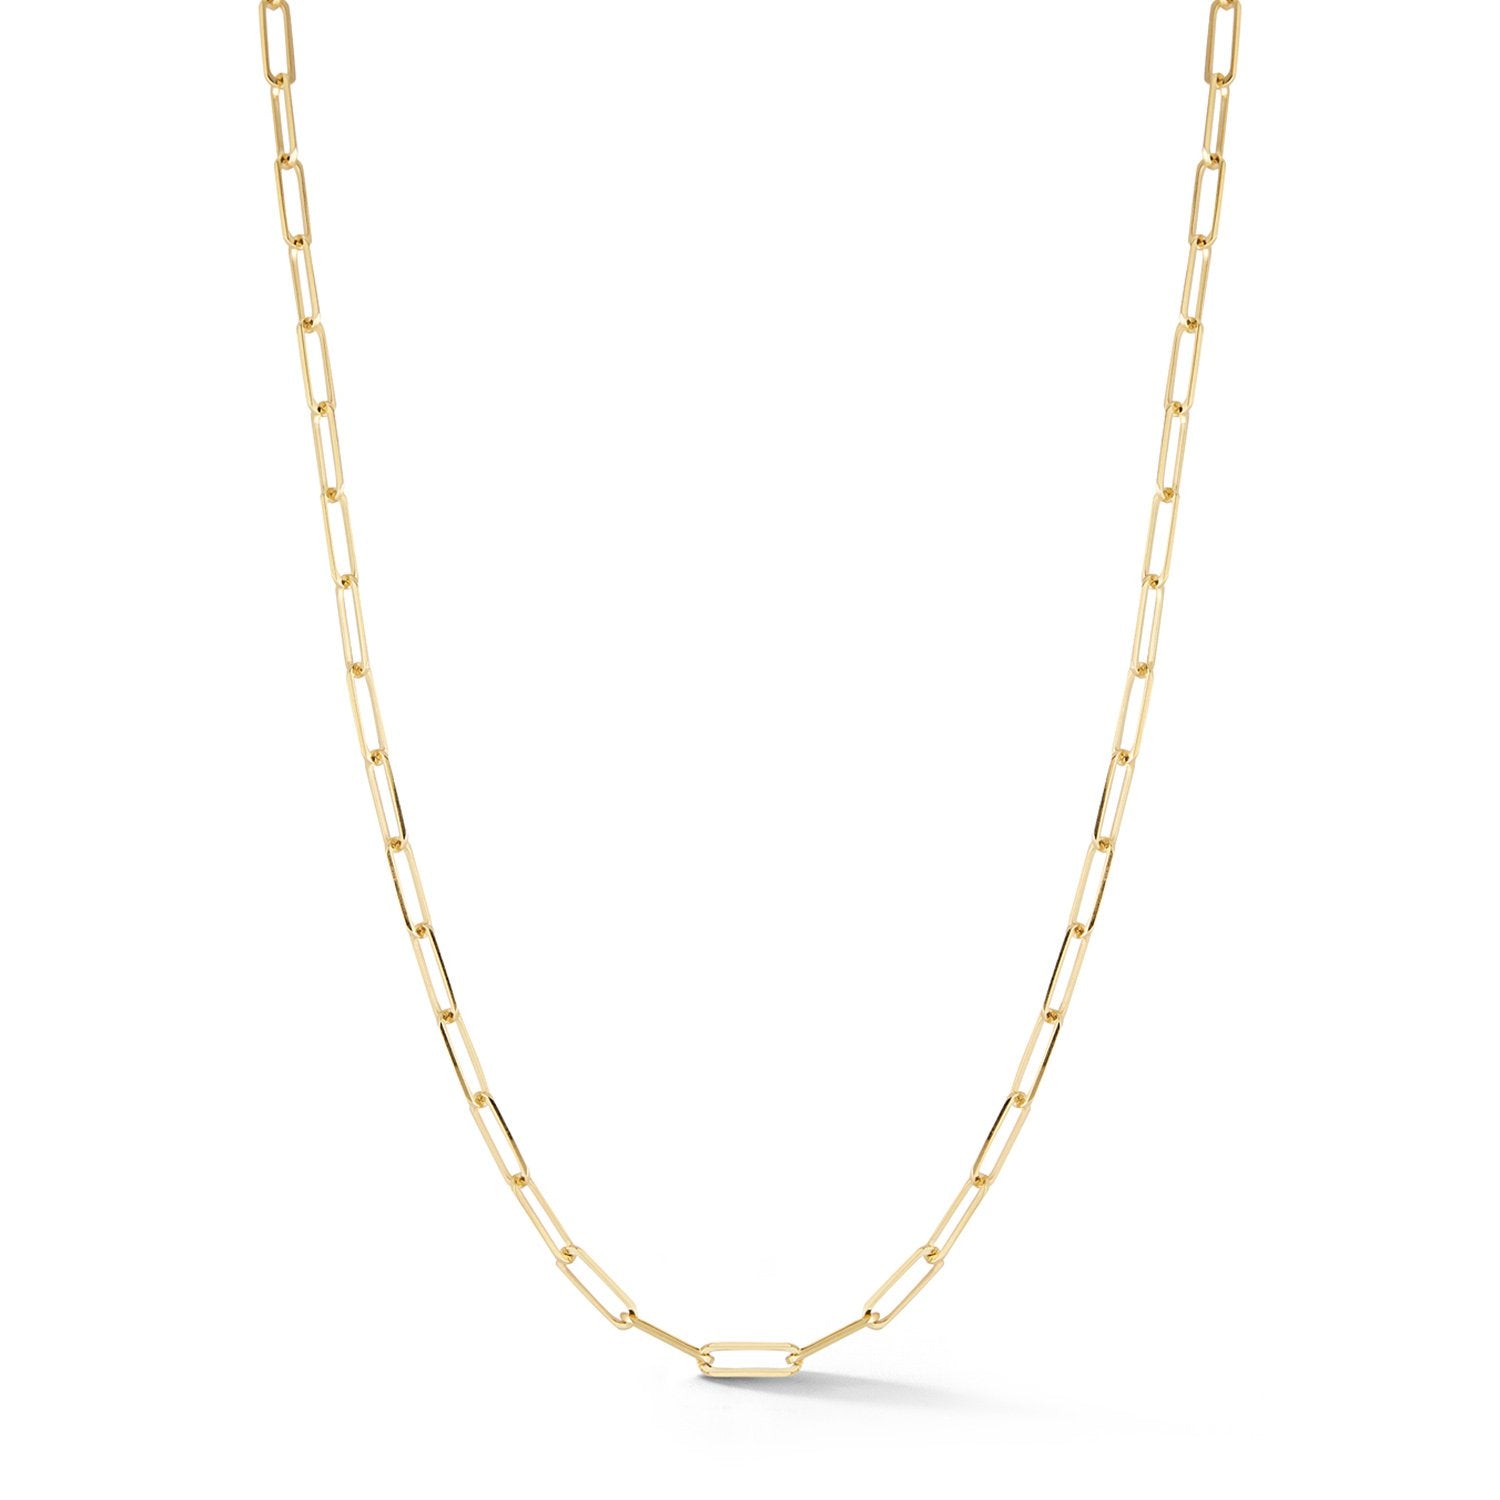 Betty Gold Chain Link Necklace in 18K Yellow Gold